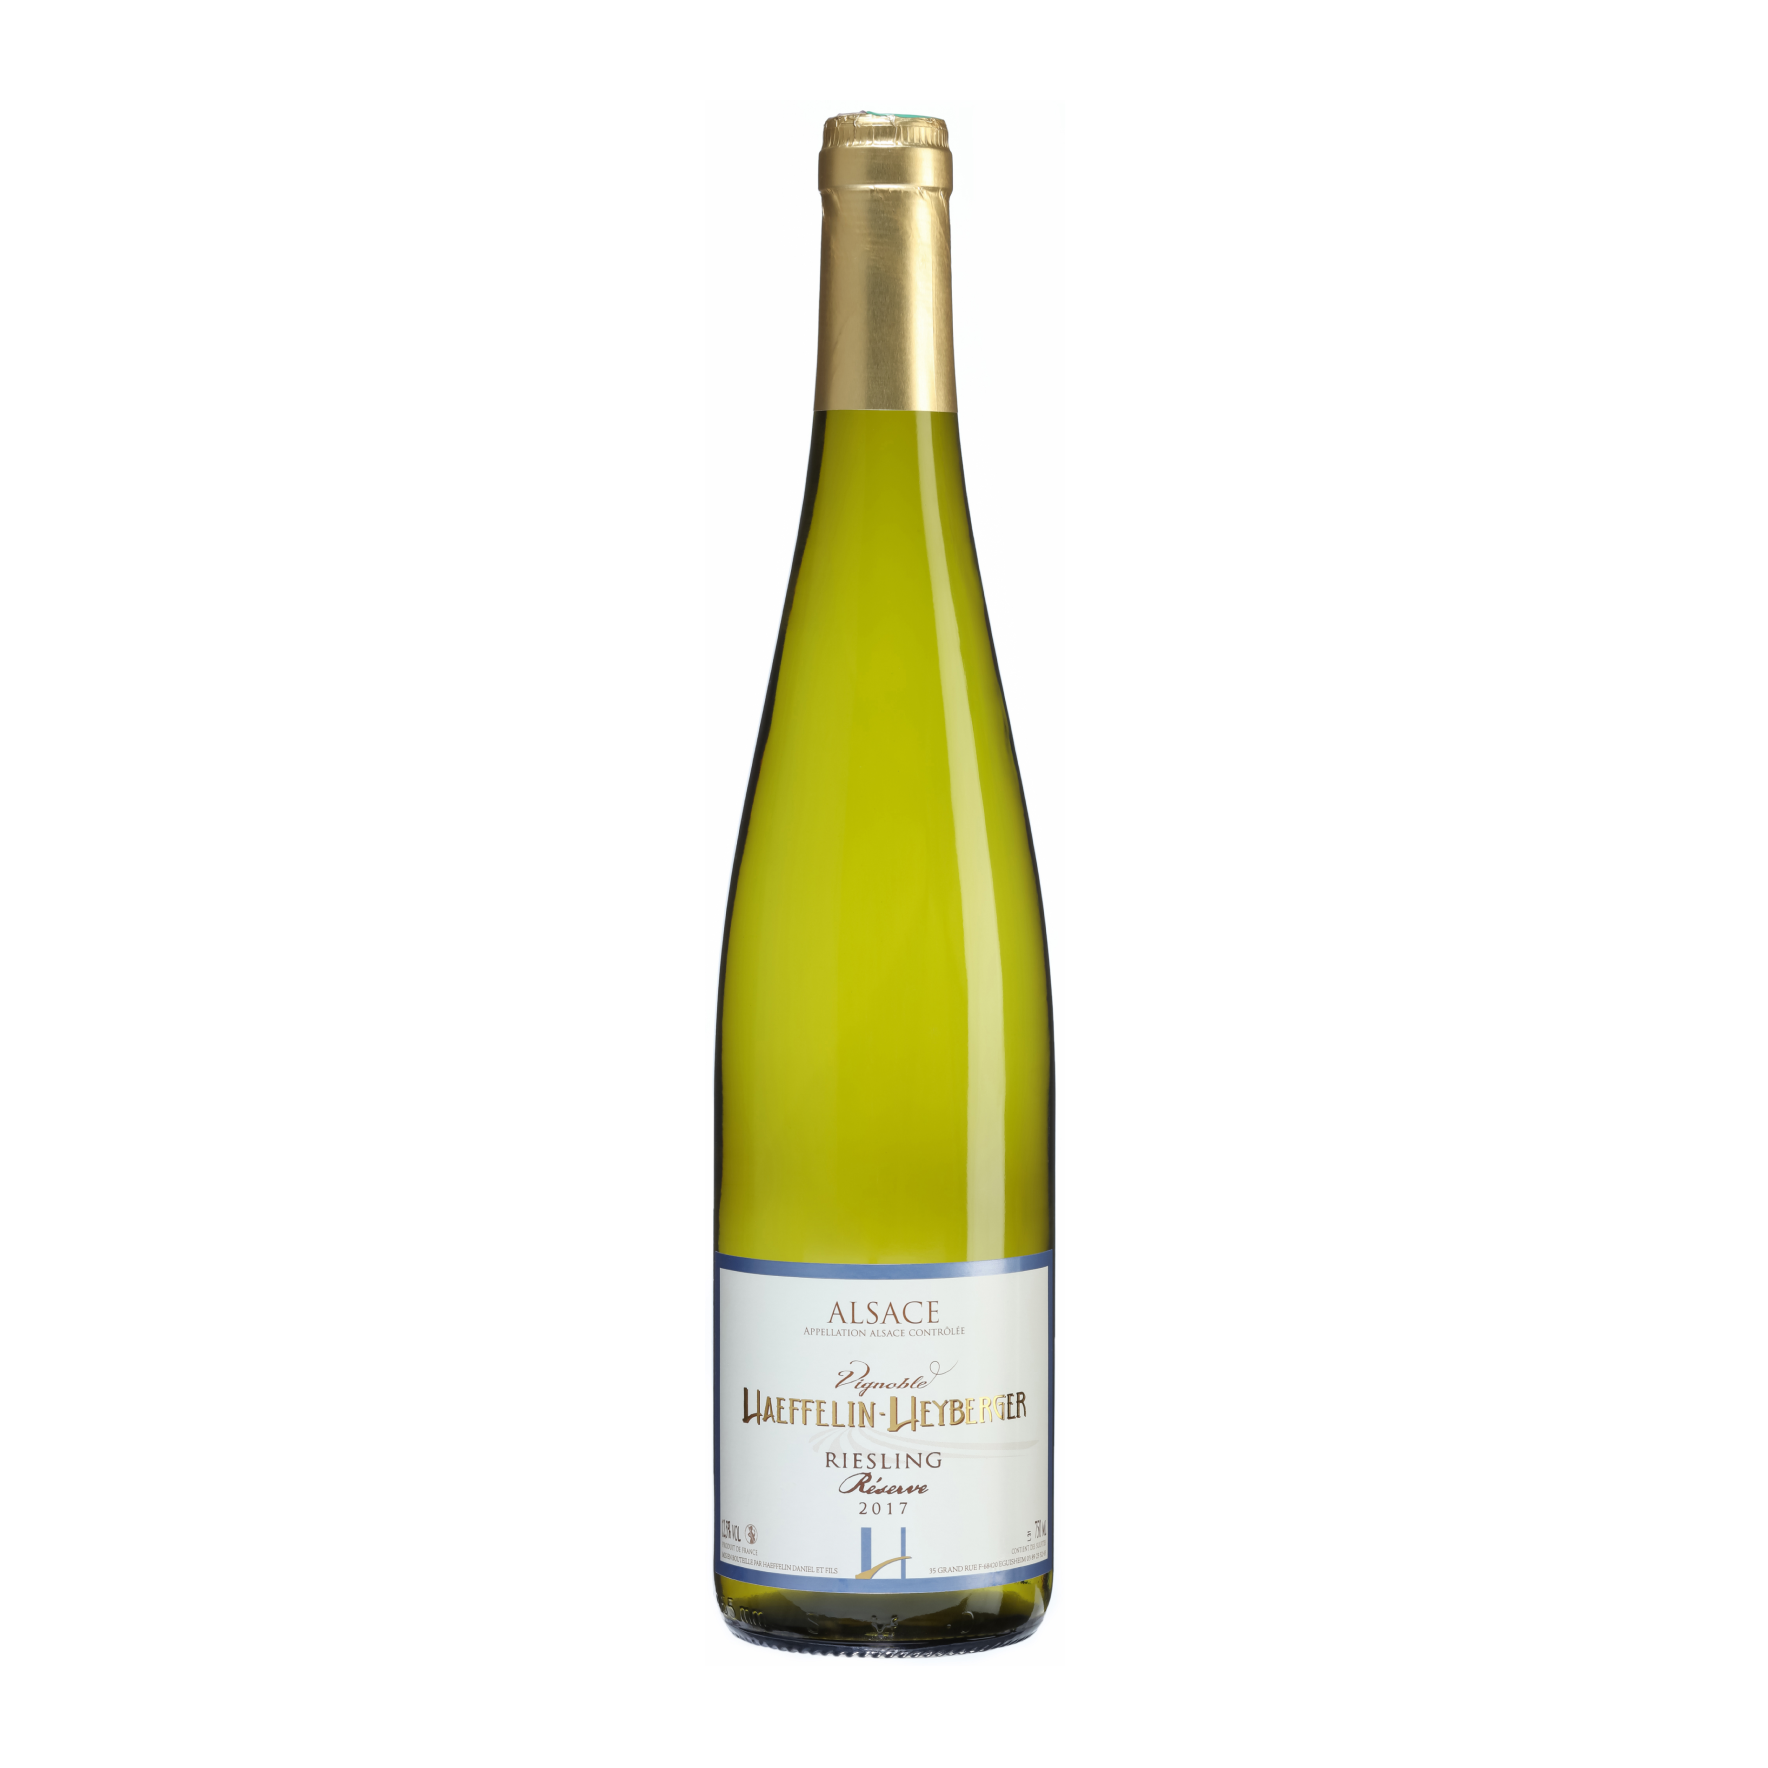 RIESLING RESERVE